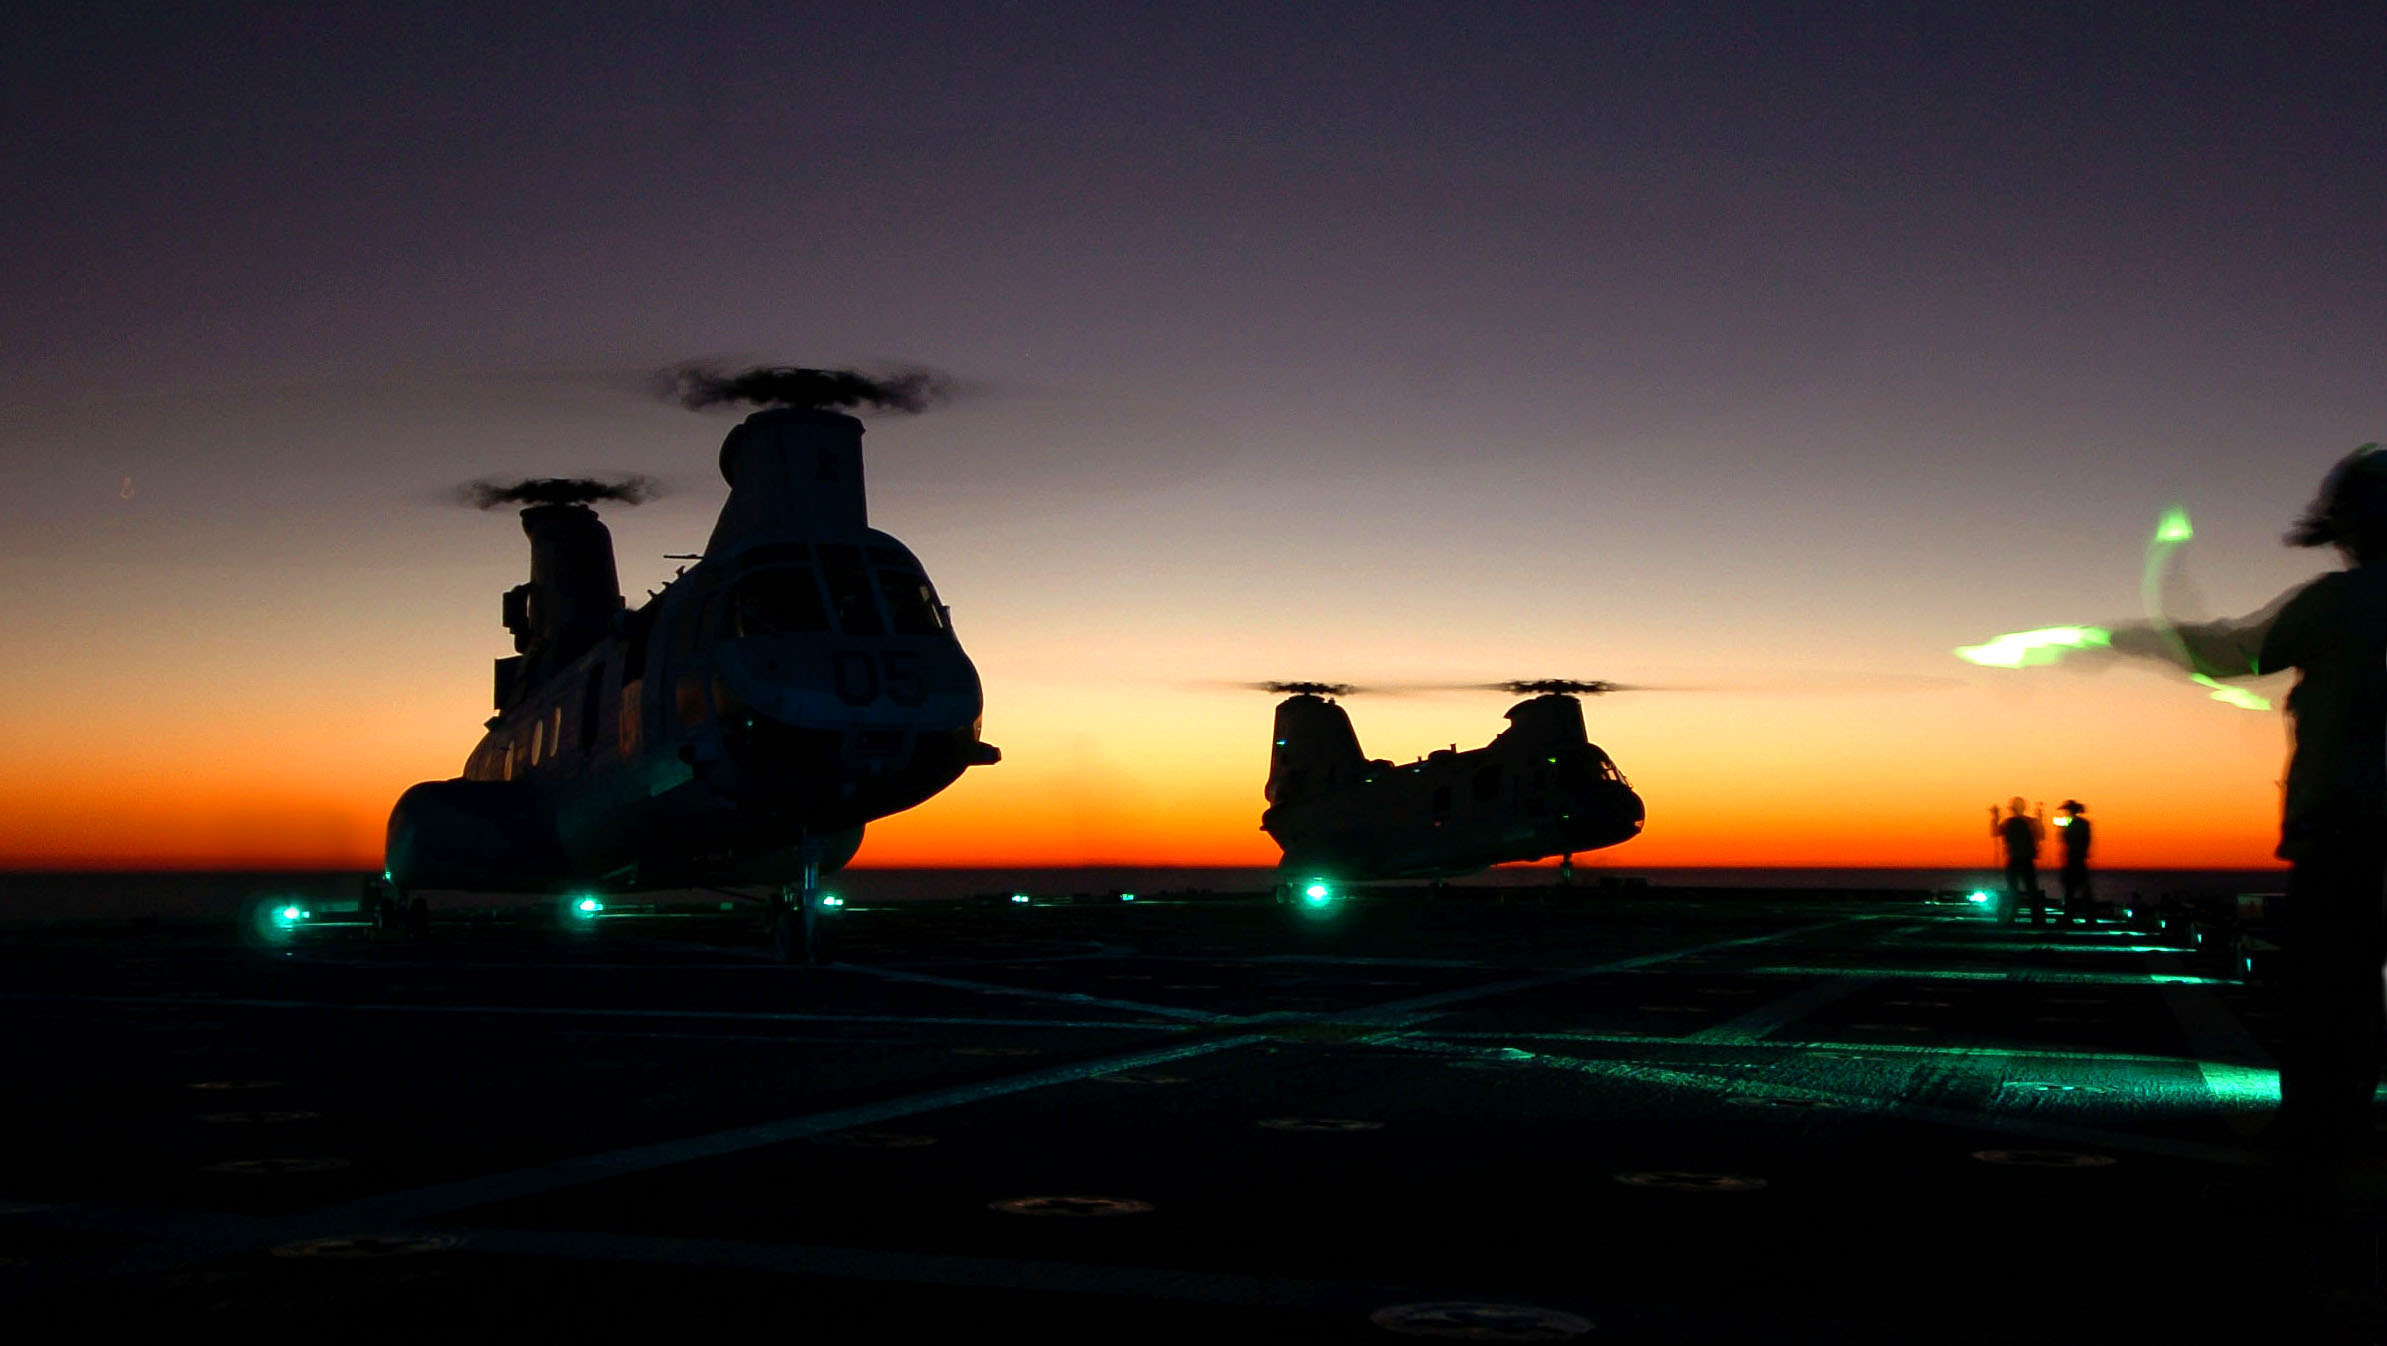 US Navy 061029-N-4236E-001 Two CH-46 Sea Knights land on the flight deck during night operations aboard the amphibious transport dock USS Shreveport (LPD 12)